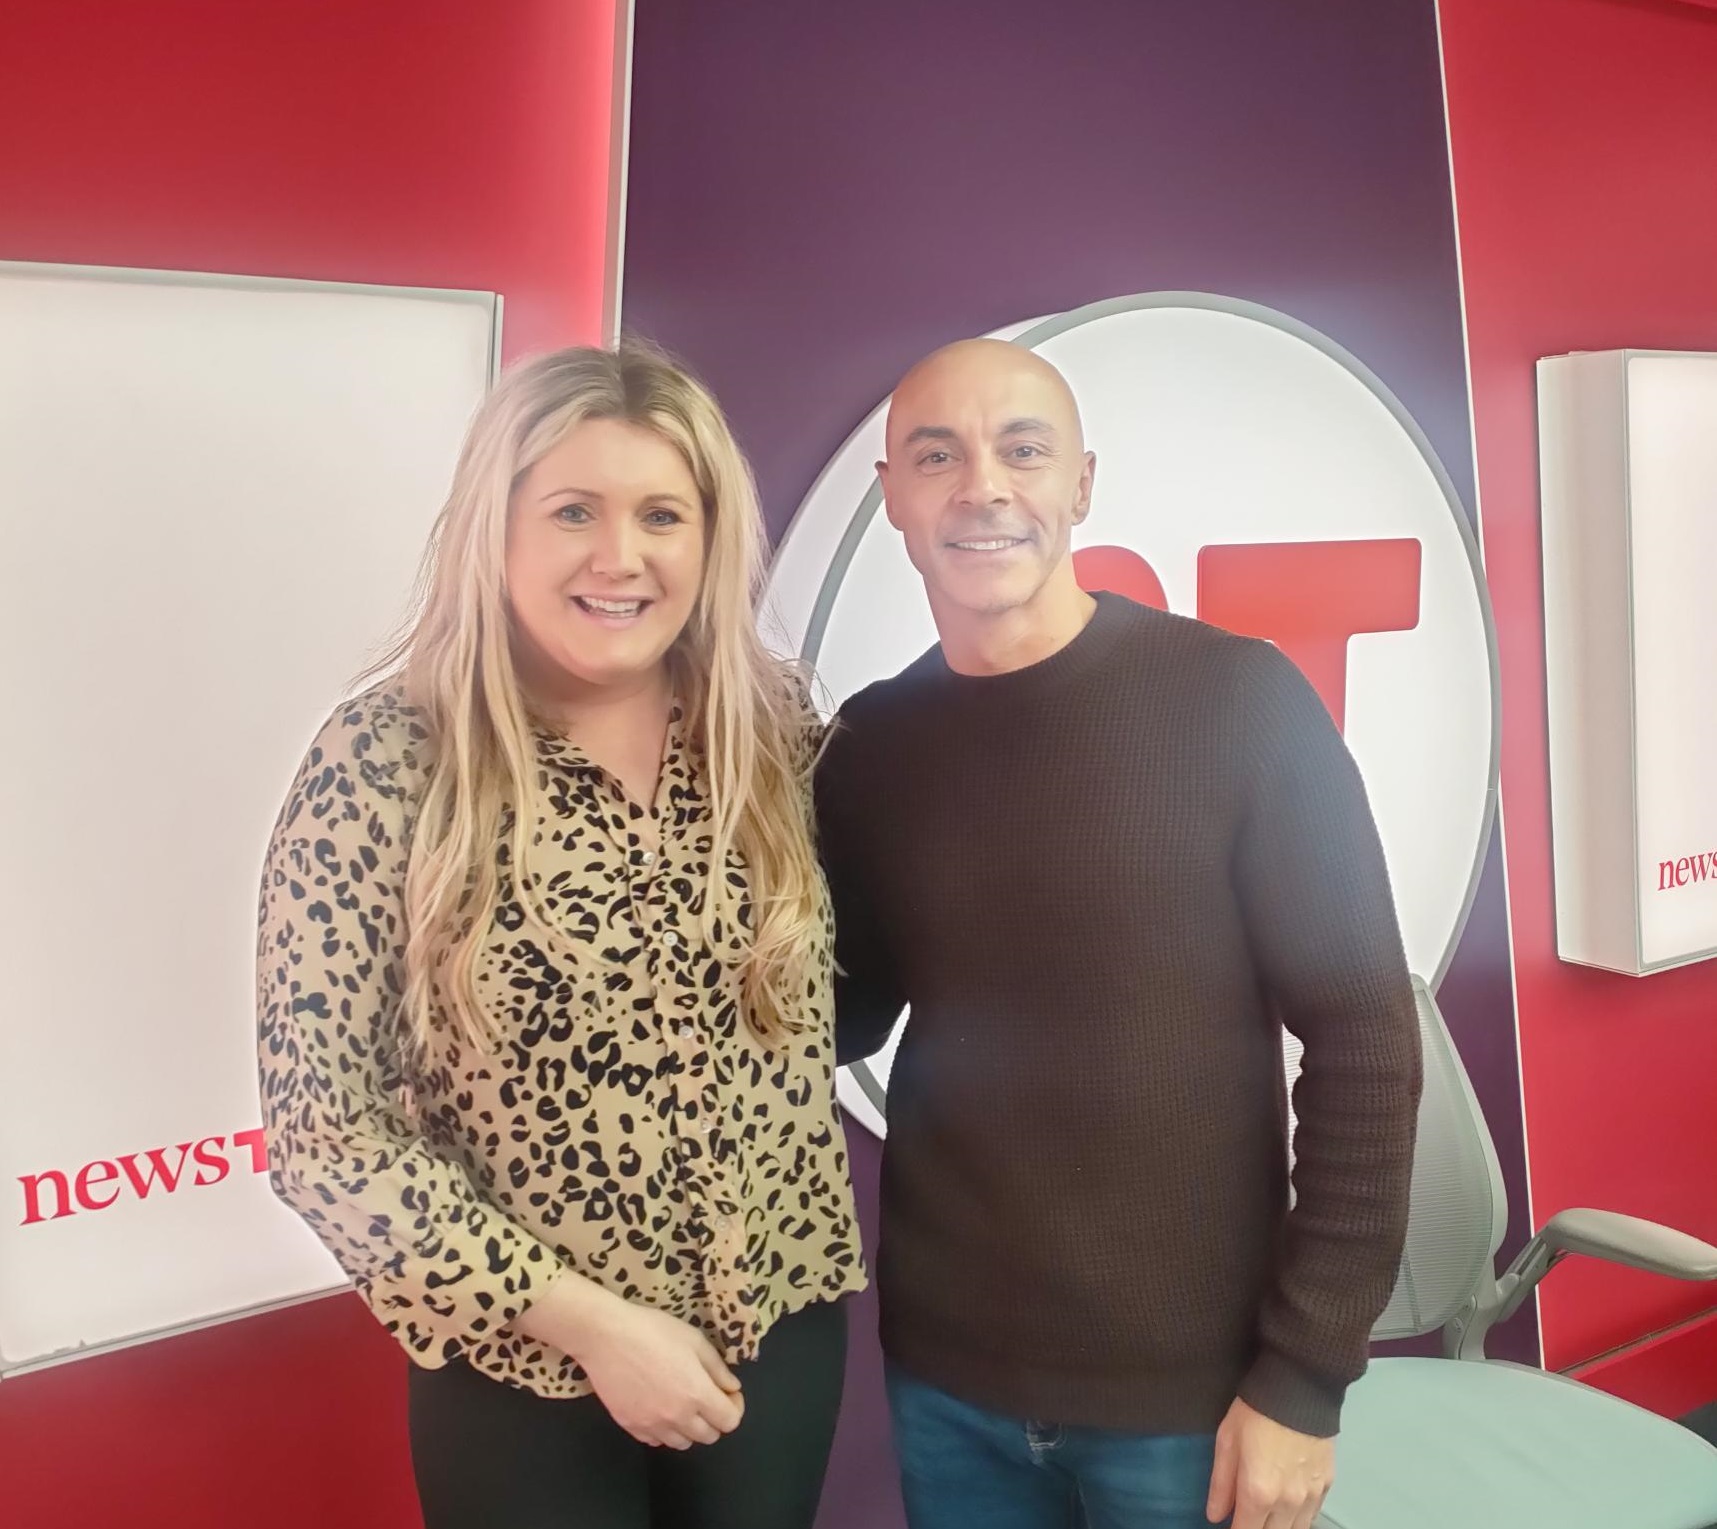 Ray Shah with Lunchtime Live host Andrea Gilligan